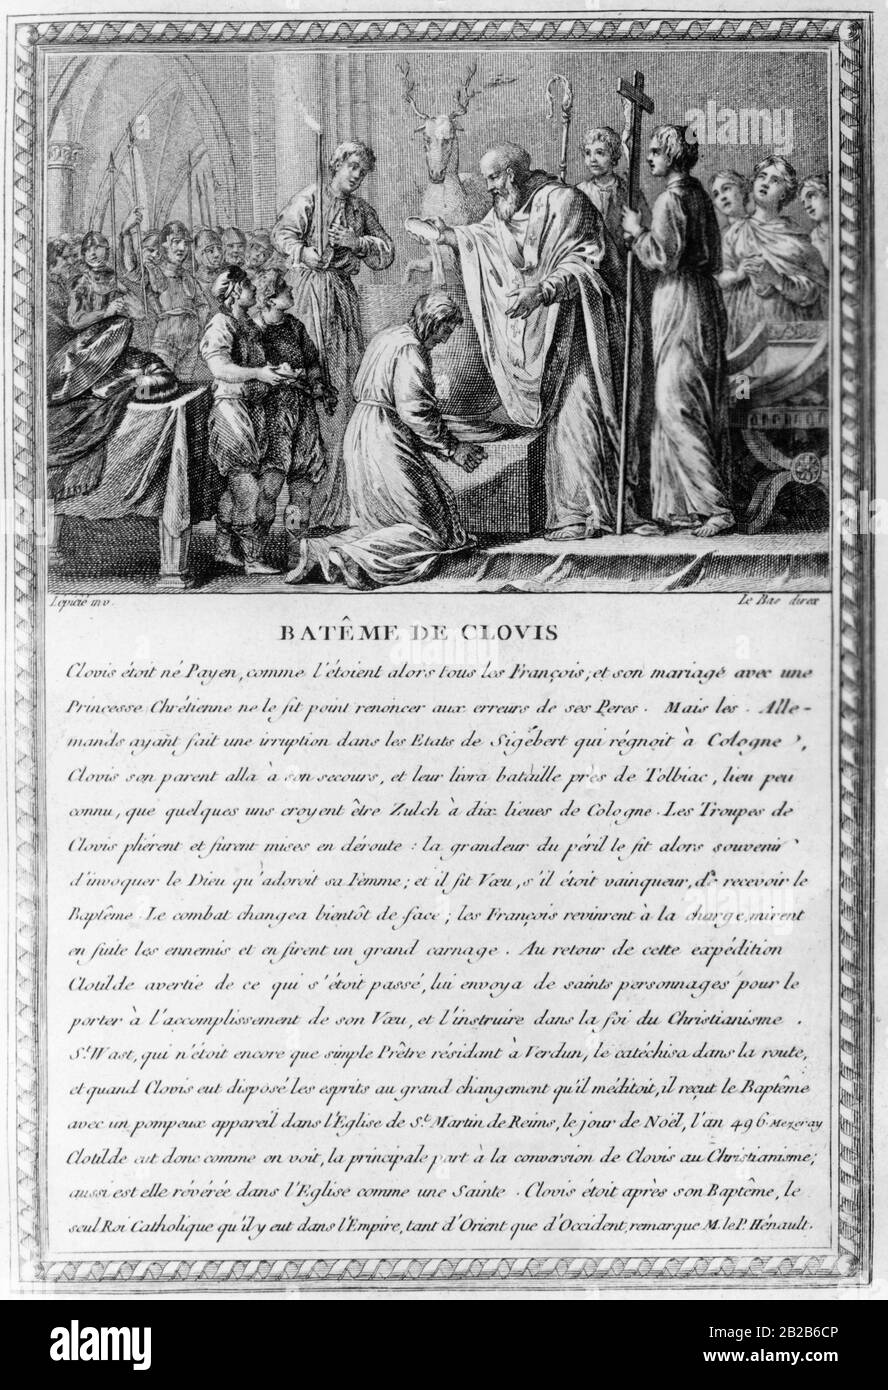 The engraving by the artist Nicolas-Bernard Lepicie from around 1780 shows Bishop Remigius baptizing King Clovis I (481-511) and 3000 other Franks at Christmas in 496 in the church of St. Martin in Reims. Stock Photo